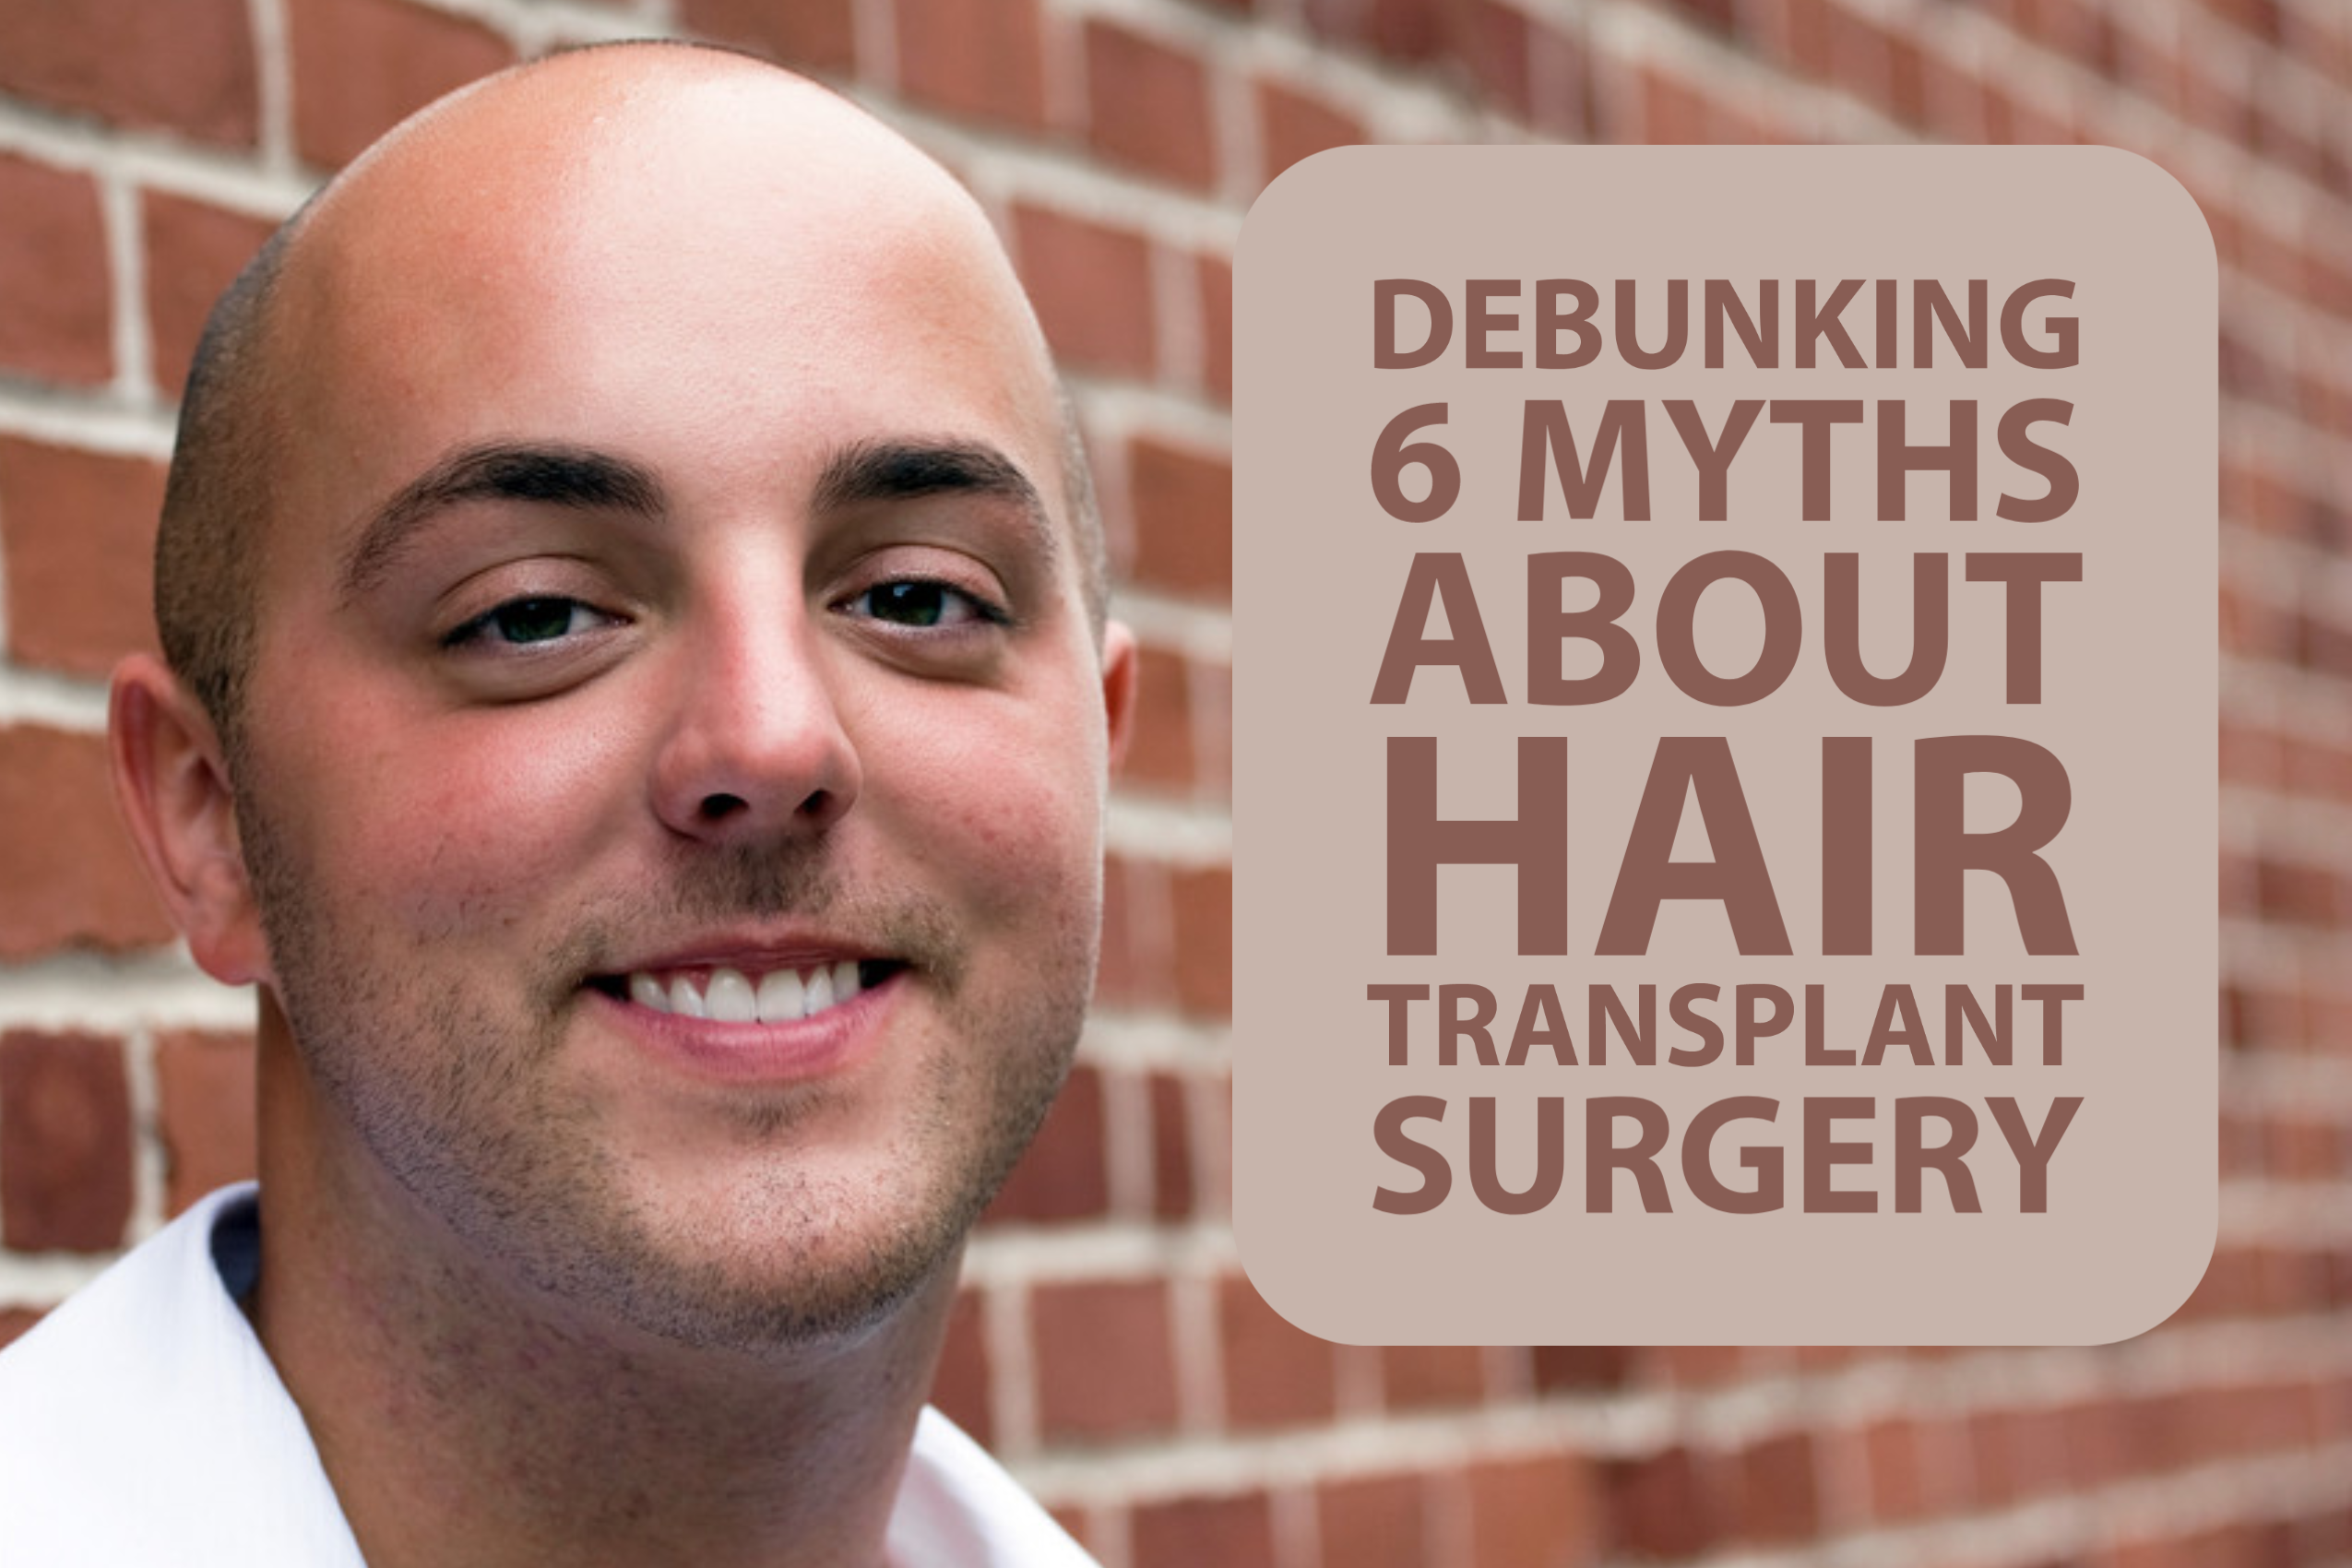 Debunking 6 Myths About Hair Transplant Surgery